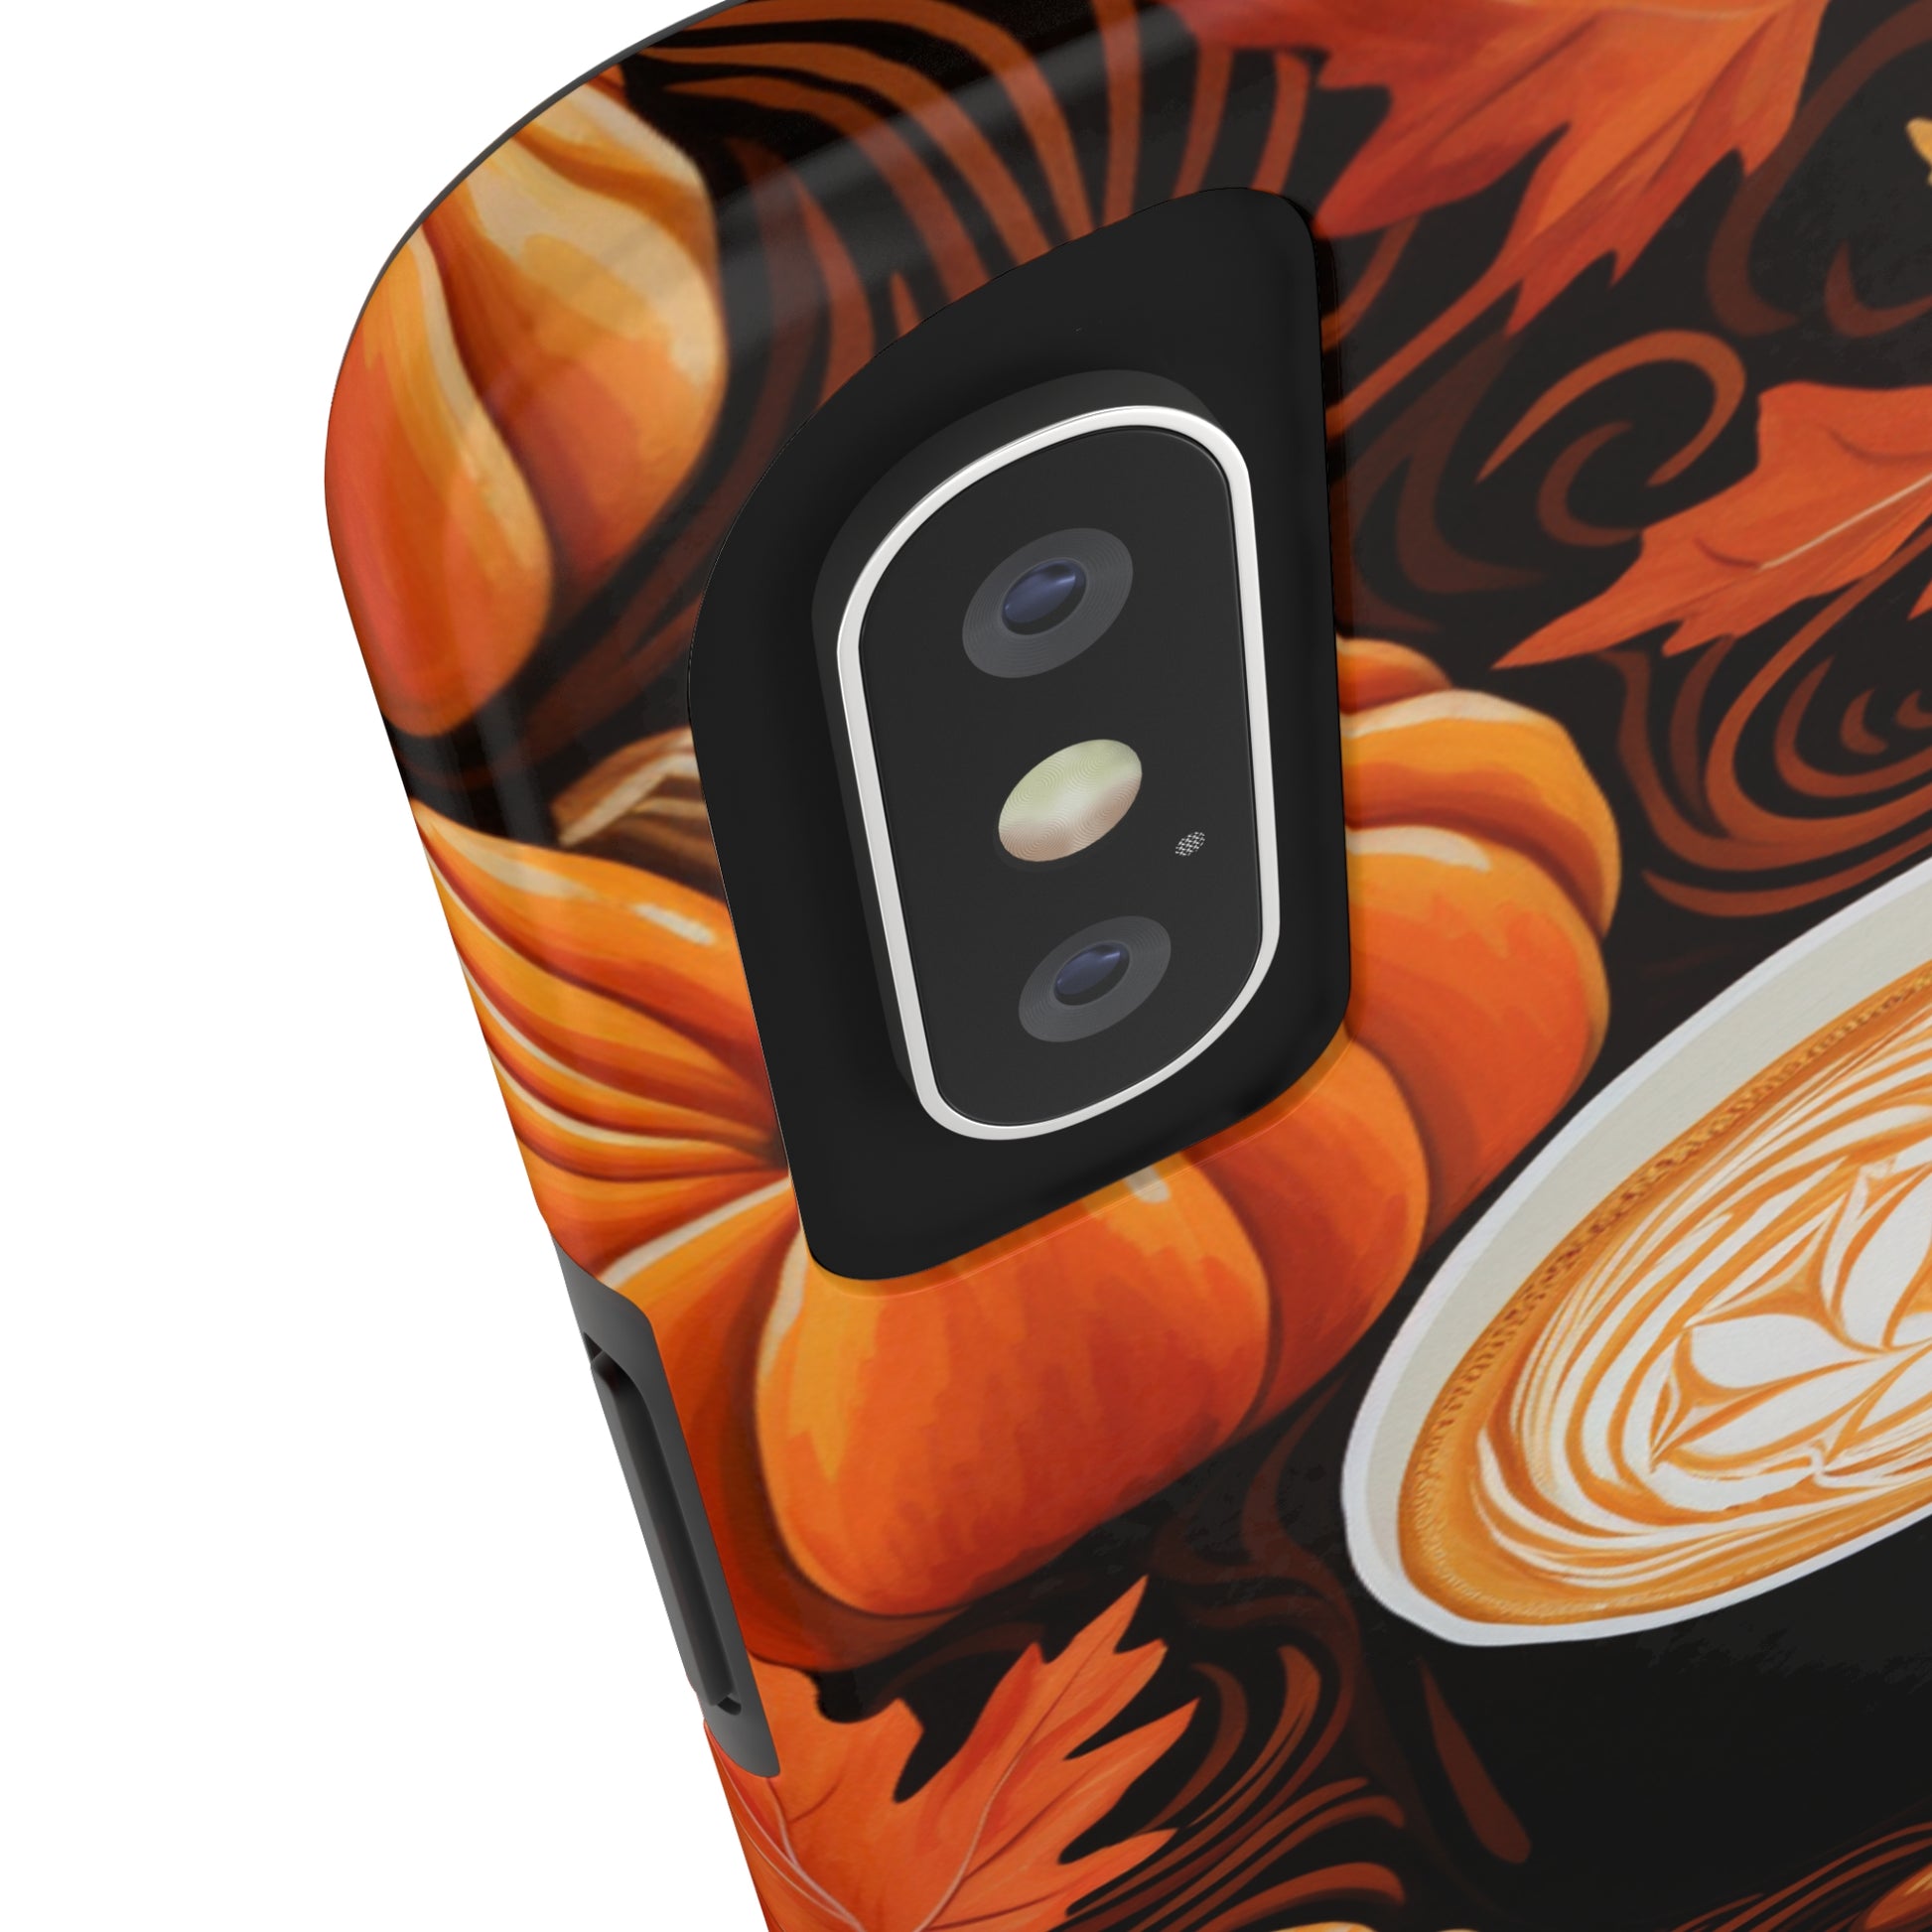 Warm Tones of Fall in a Phone Case